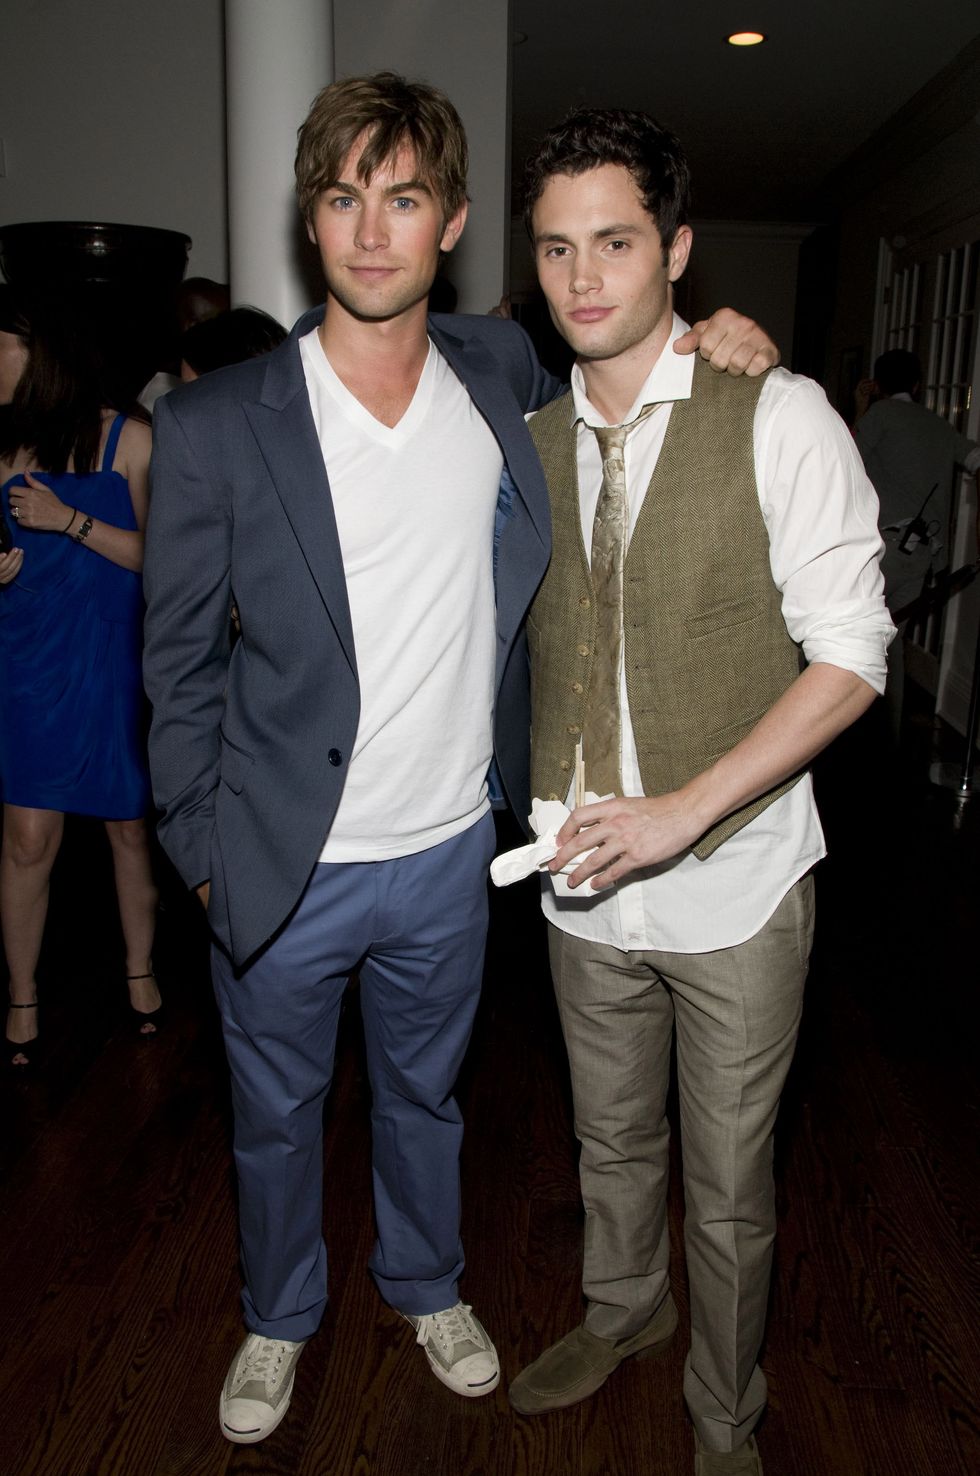 Vitaminwater Hosts an End-of-Summer Hamptons Bash for the CW Network?s "Gossip Girl"